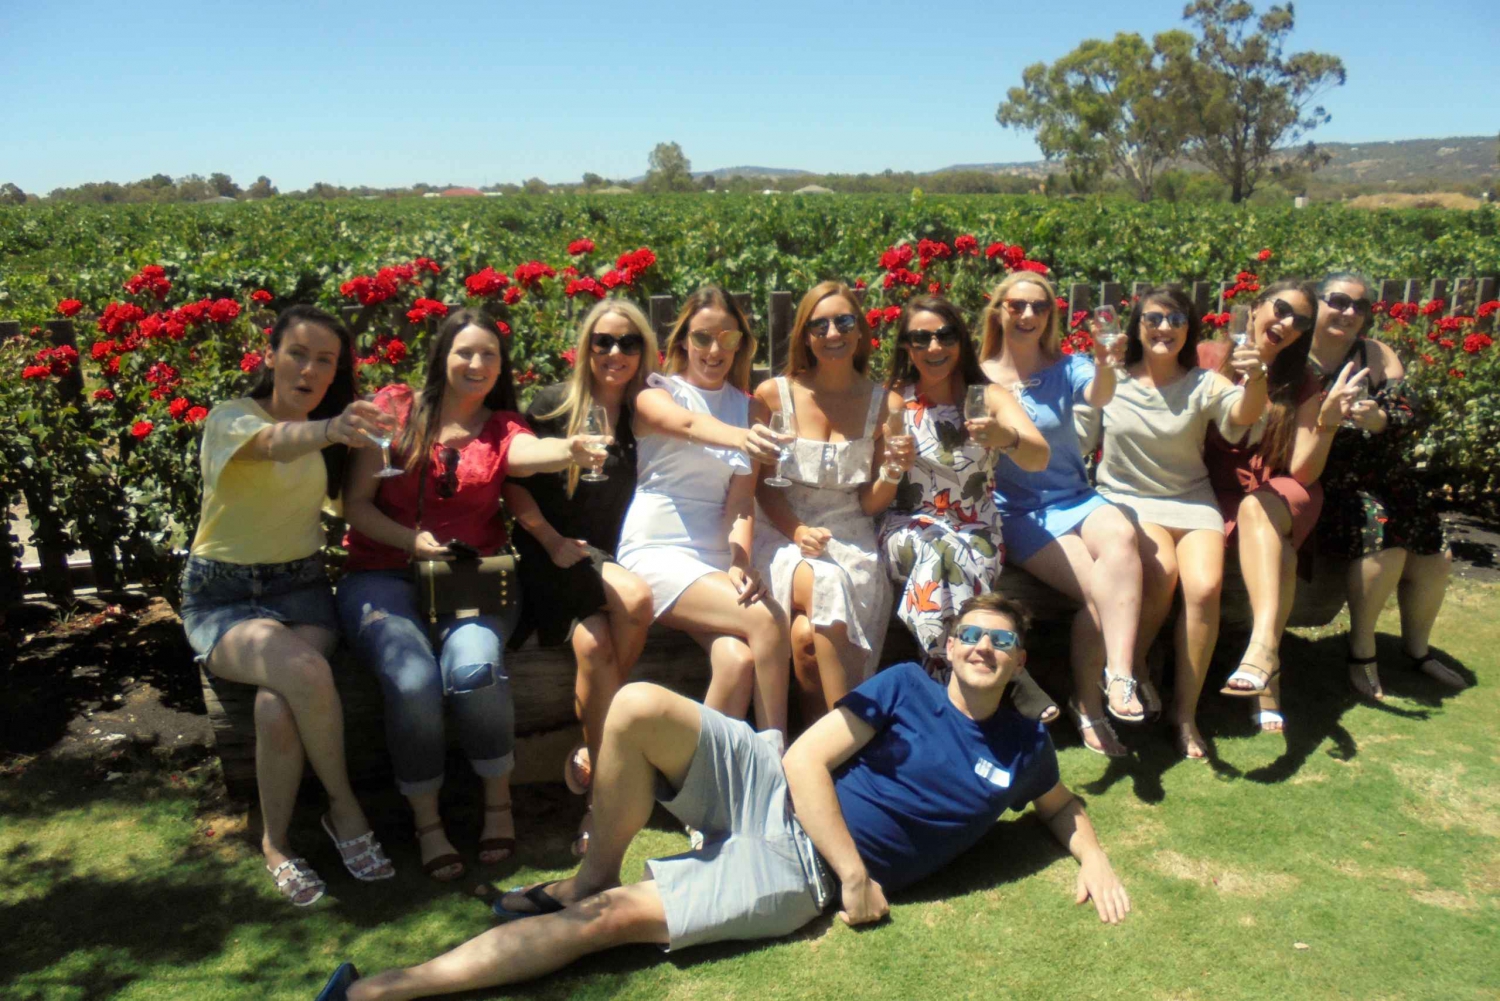 Heritage Town of Guildford and Swan Valley Wine Tour